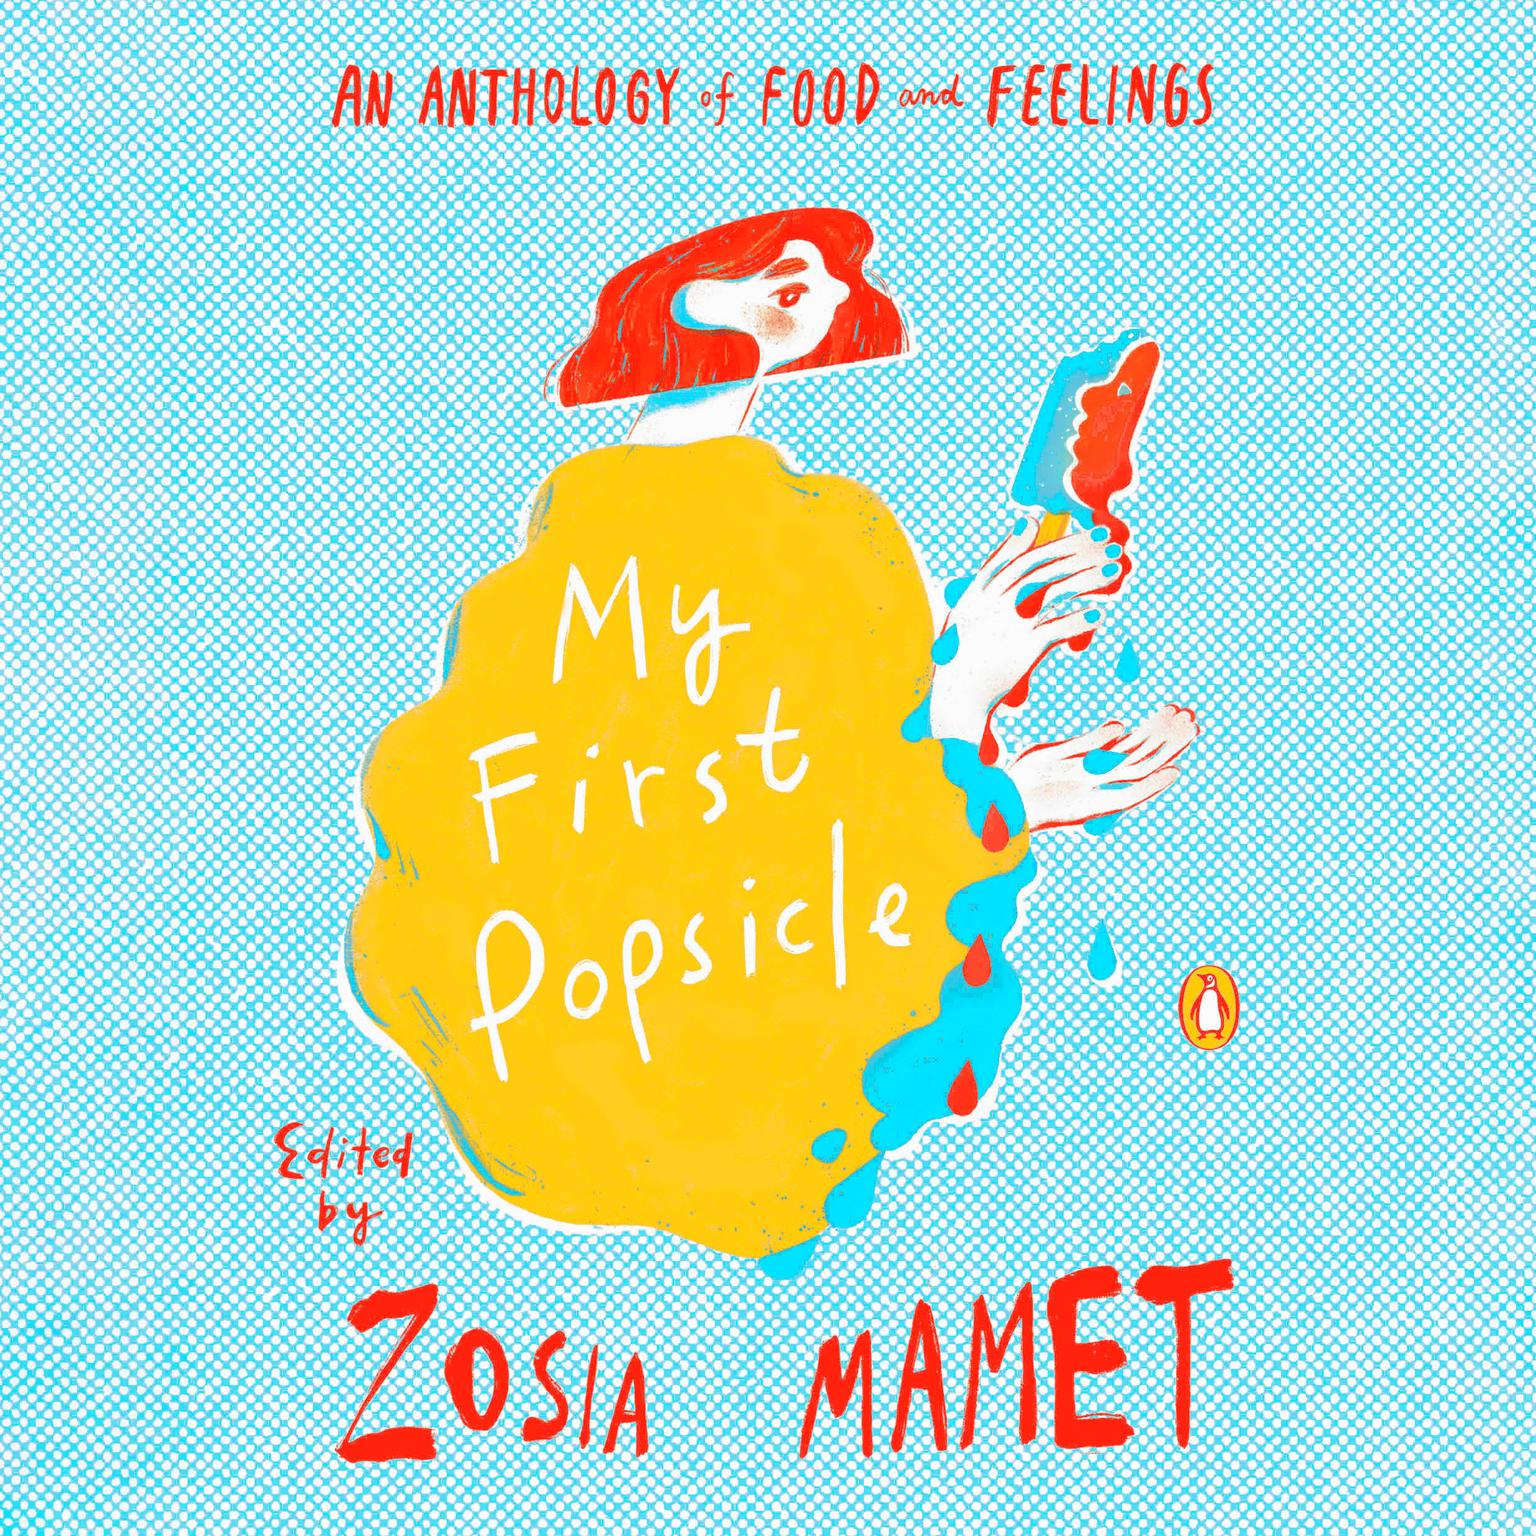 My First Popsicle: An Anthology of Food and Feelings Audiobook, by Zosia Mamet